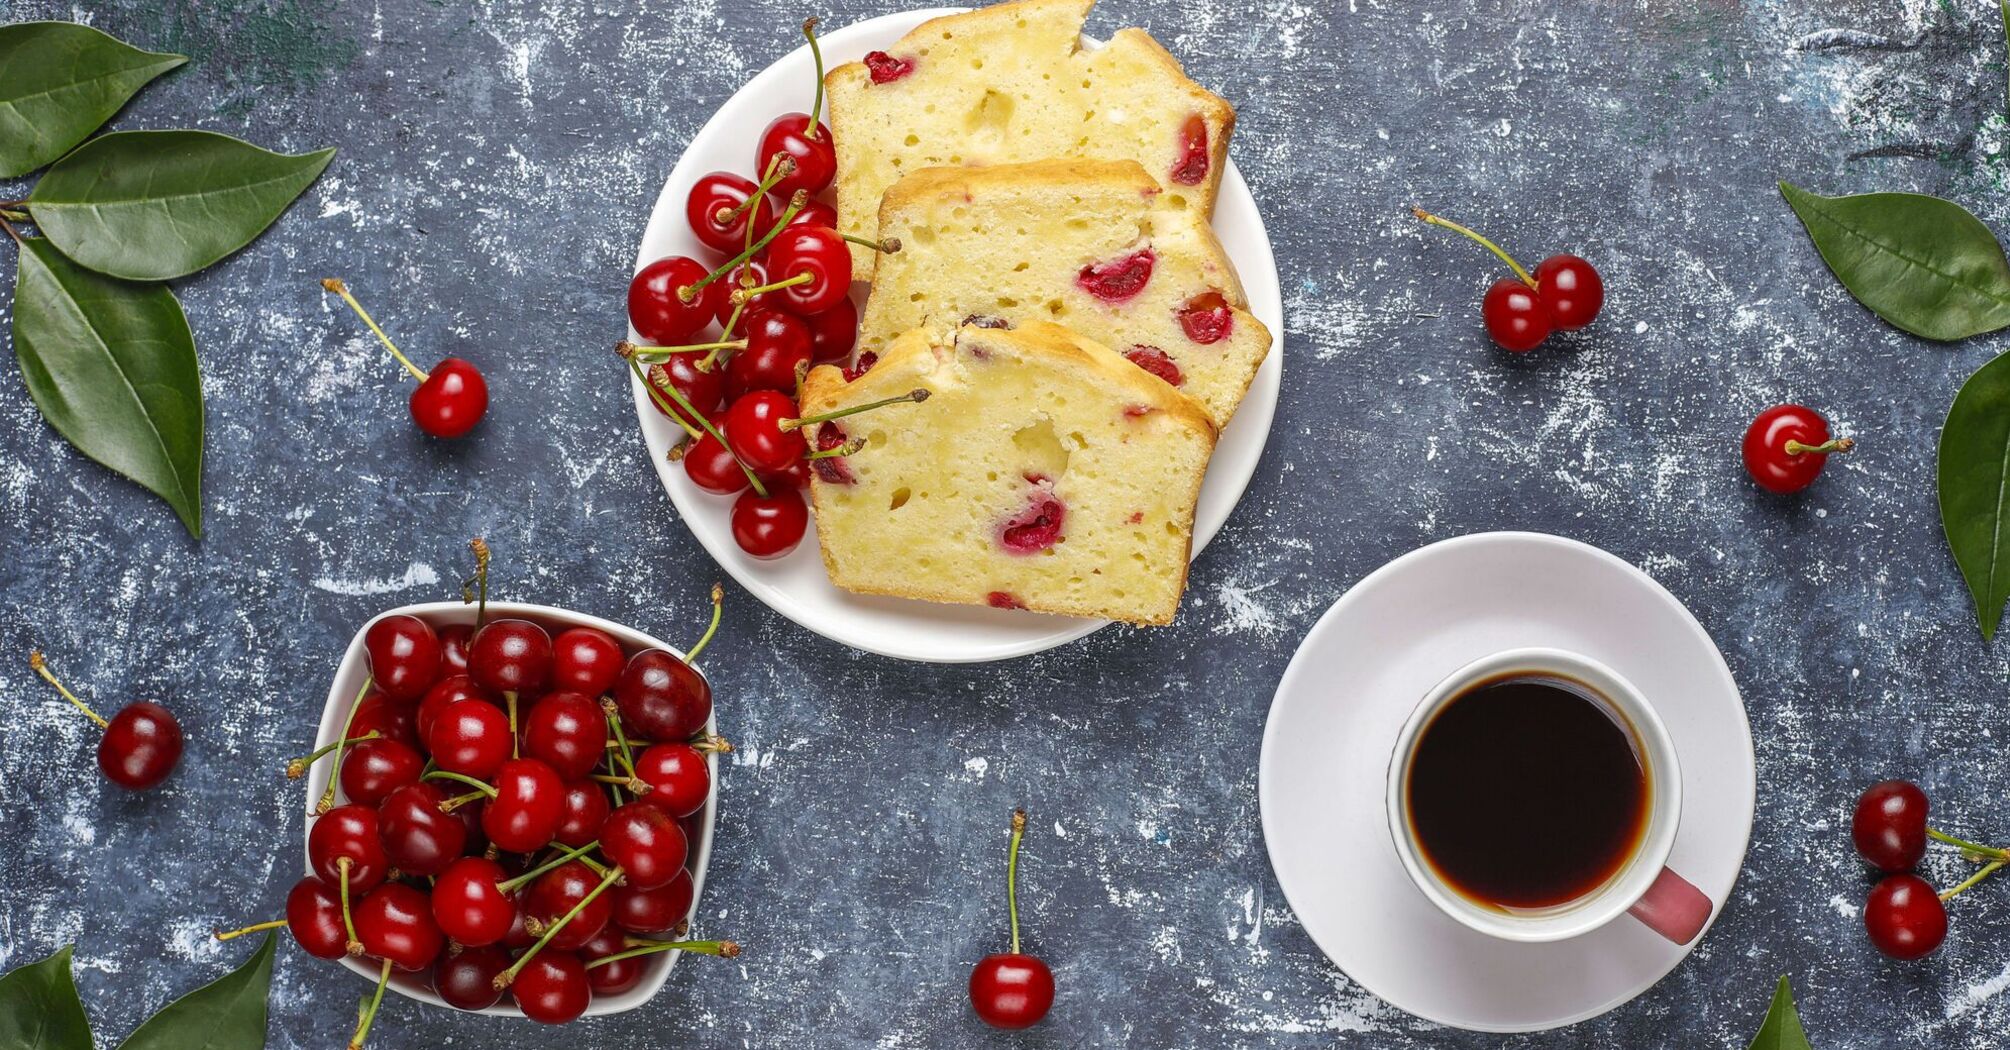 Cherry clafoutis: recipe for a fascinating French dessert